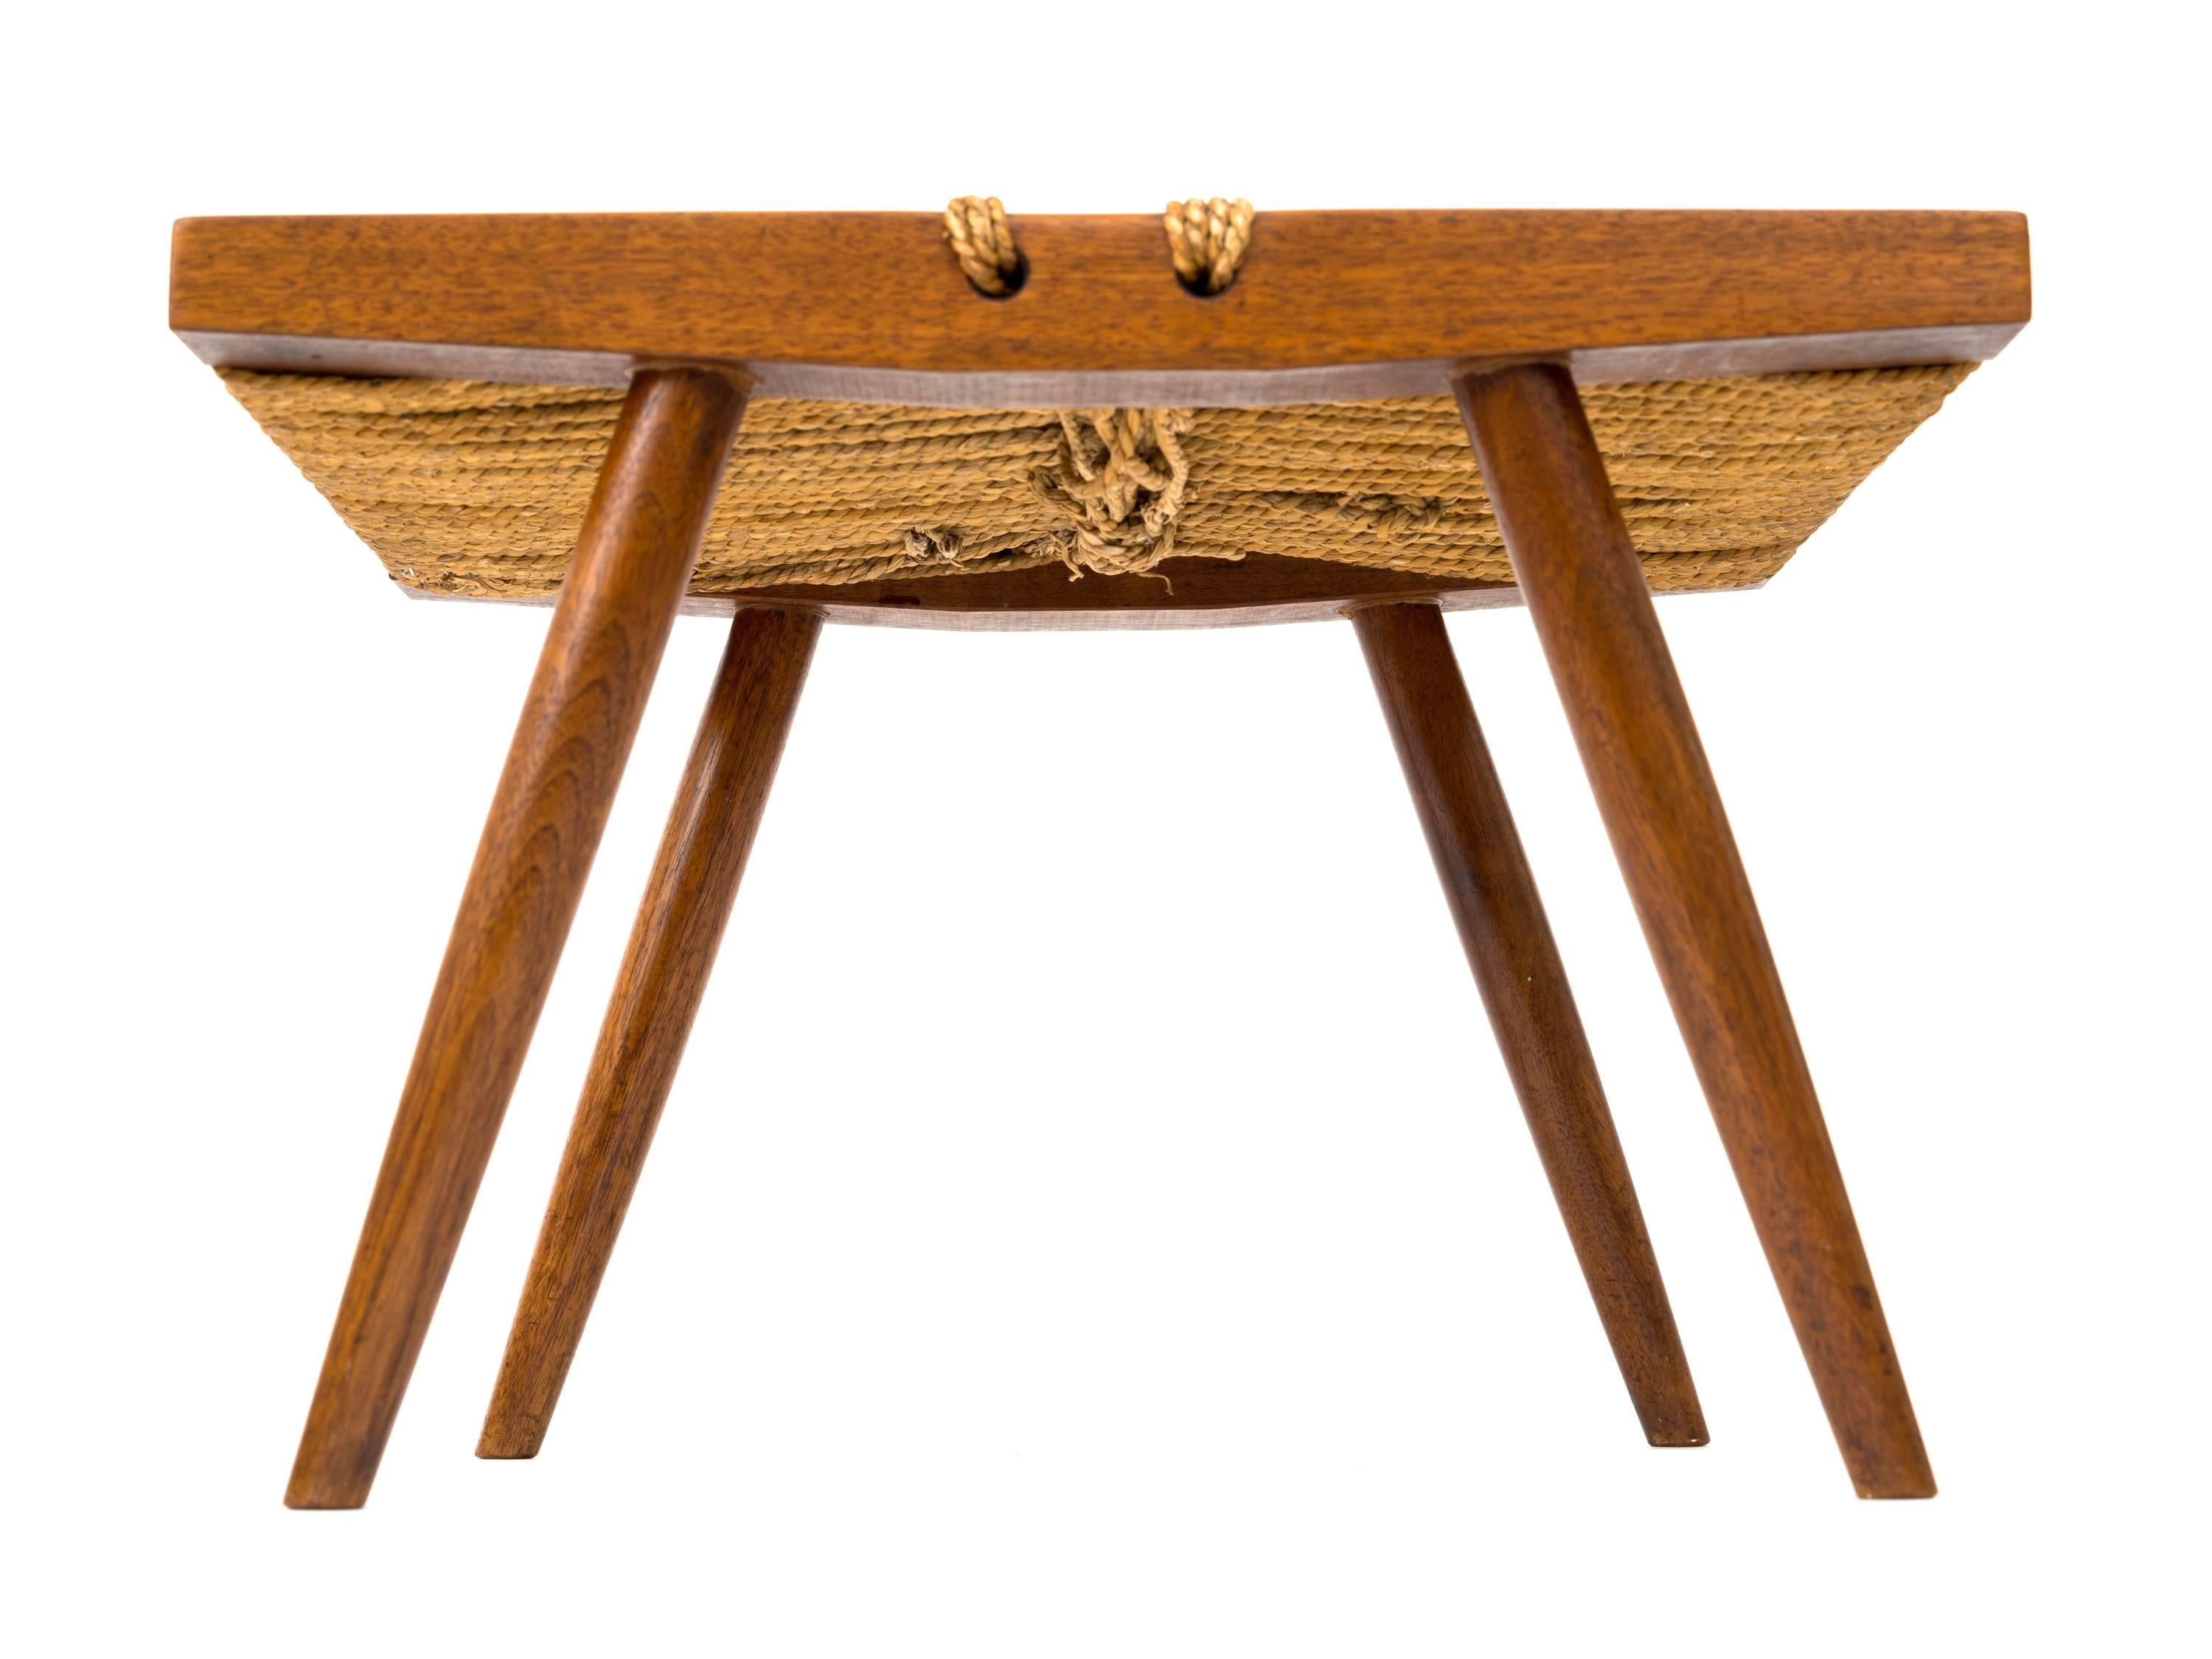 Footstool with splayed legs in walnut and a woven grass rope seat by George Nakashima. This example has a rich patina throughout and dates to the late 50s / early 60s.